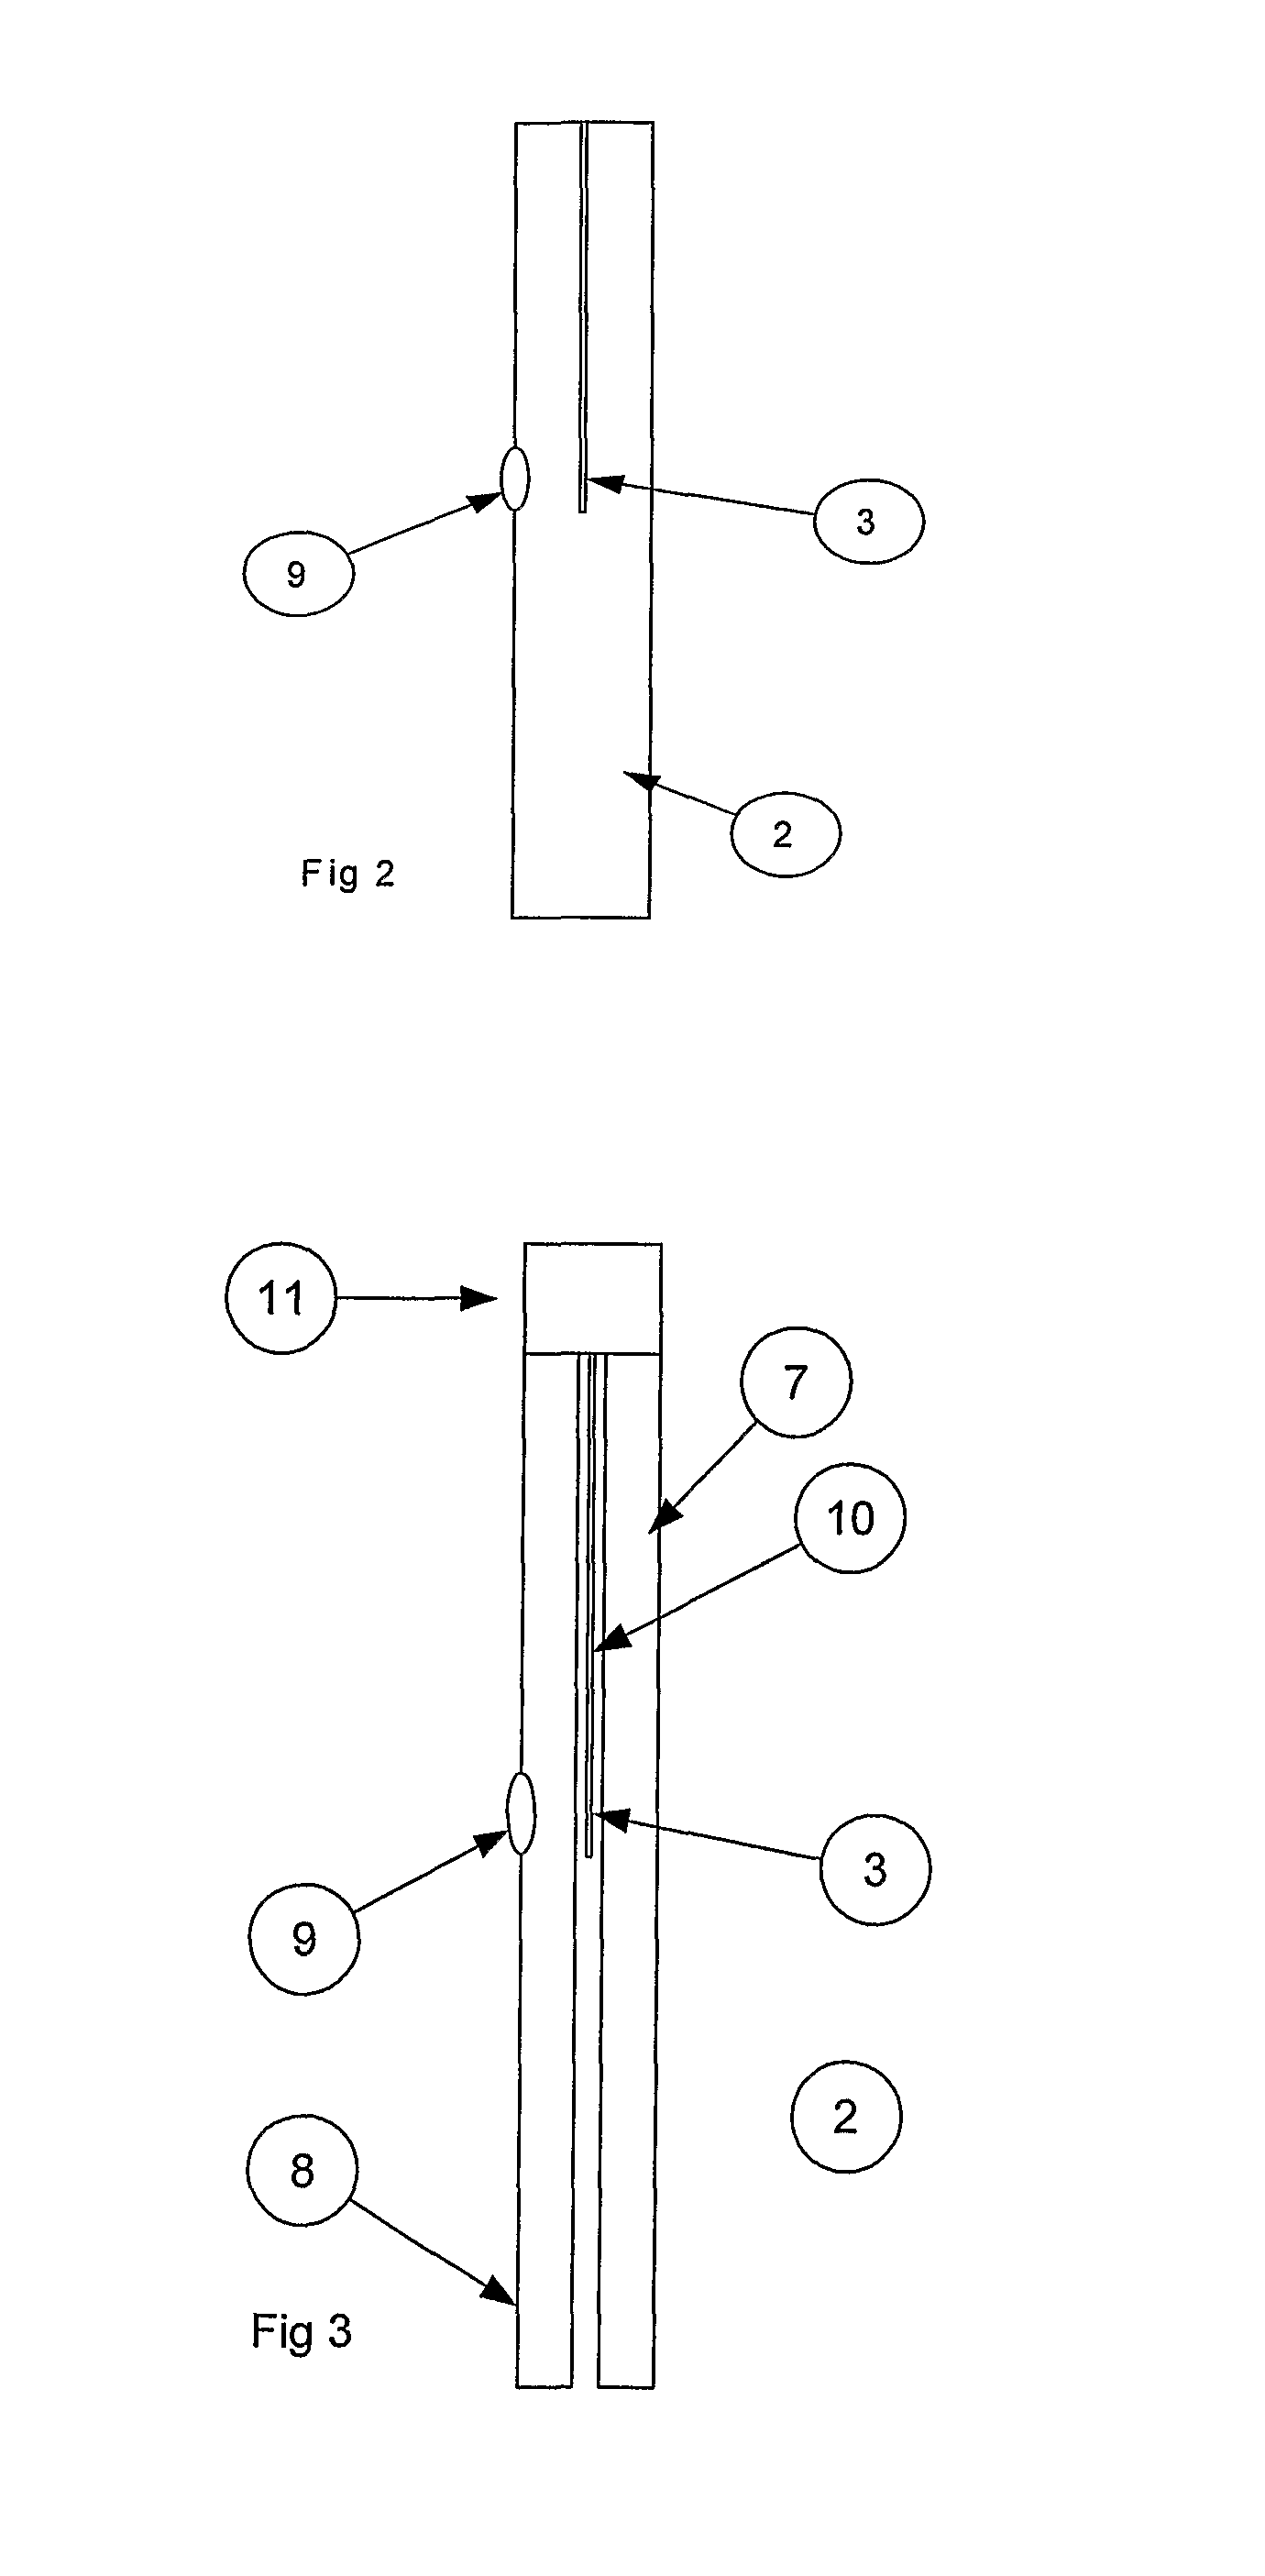 Spectacles With Embedded Segmented Display Comprising Light Guide End